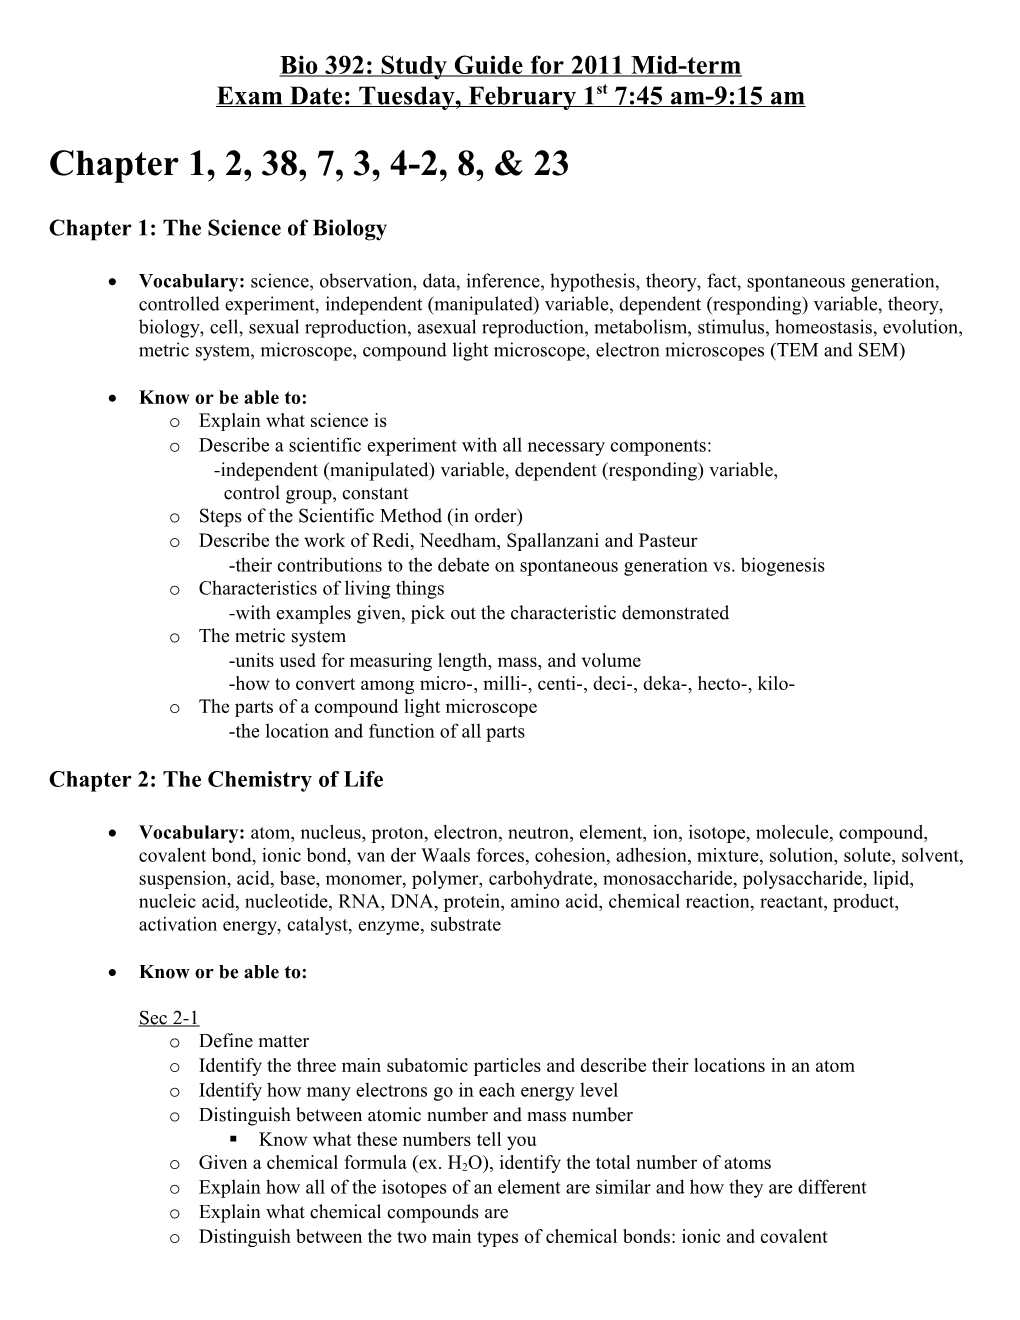 Study Guide for Chapter 1 Test